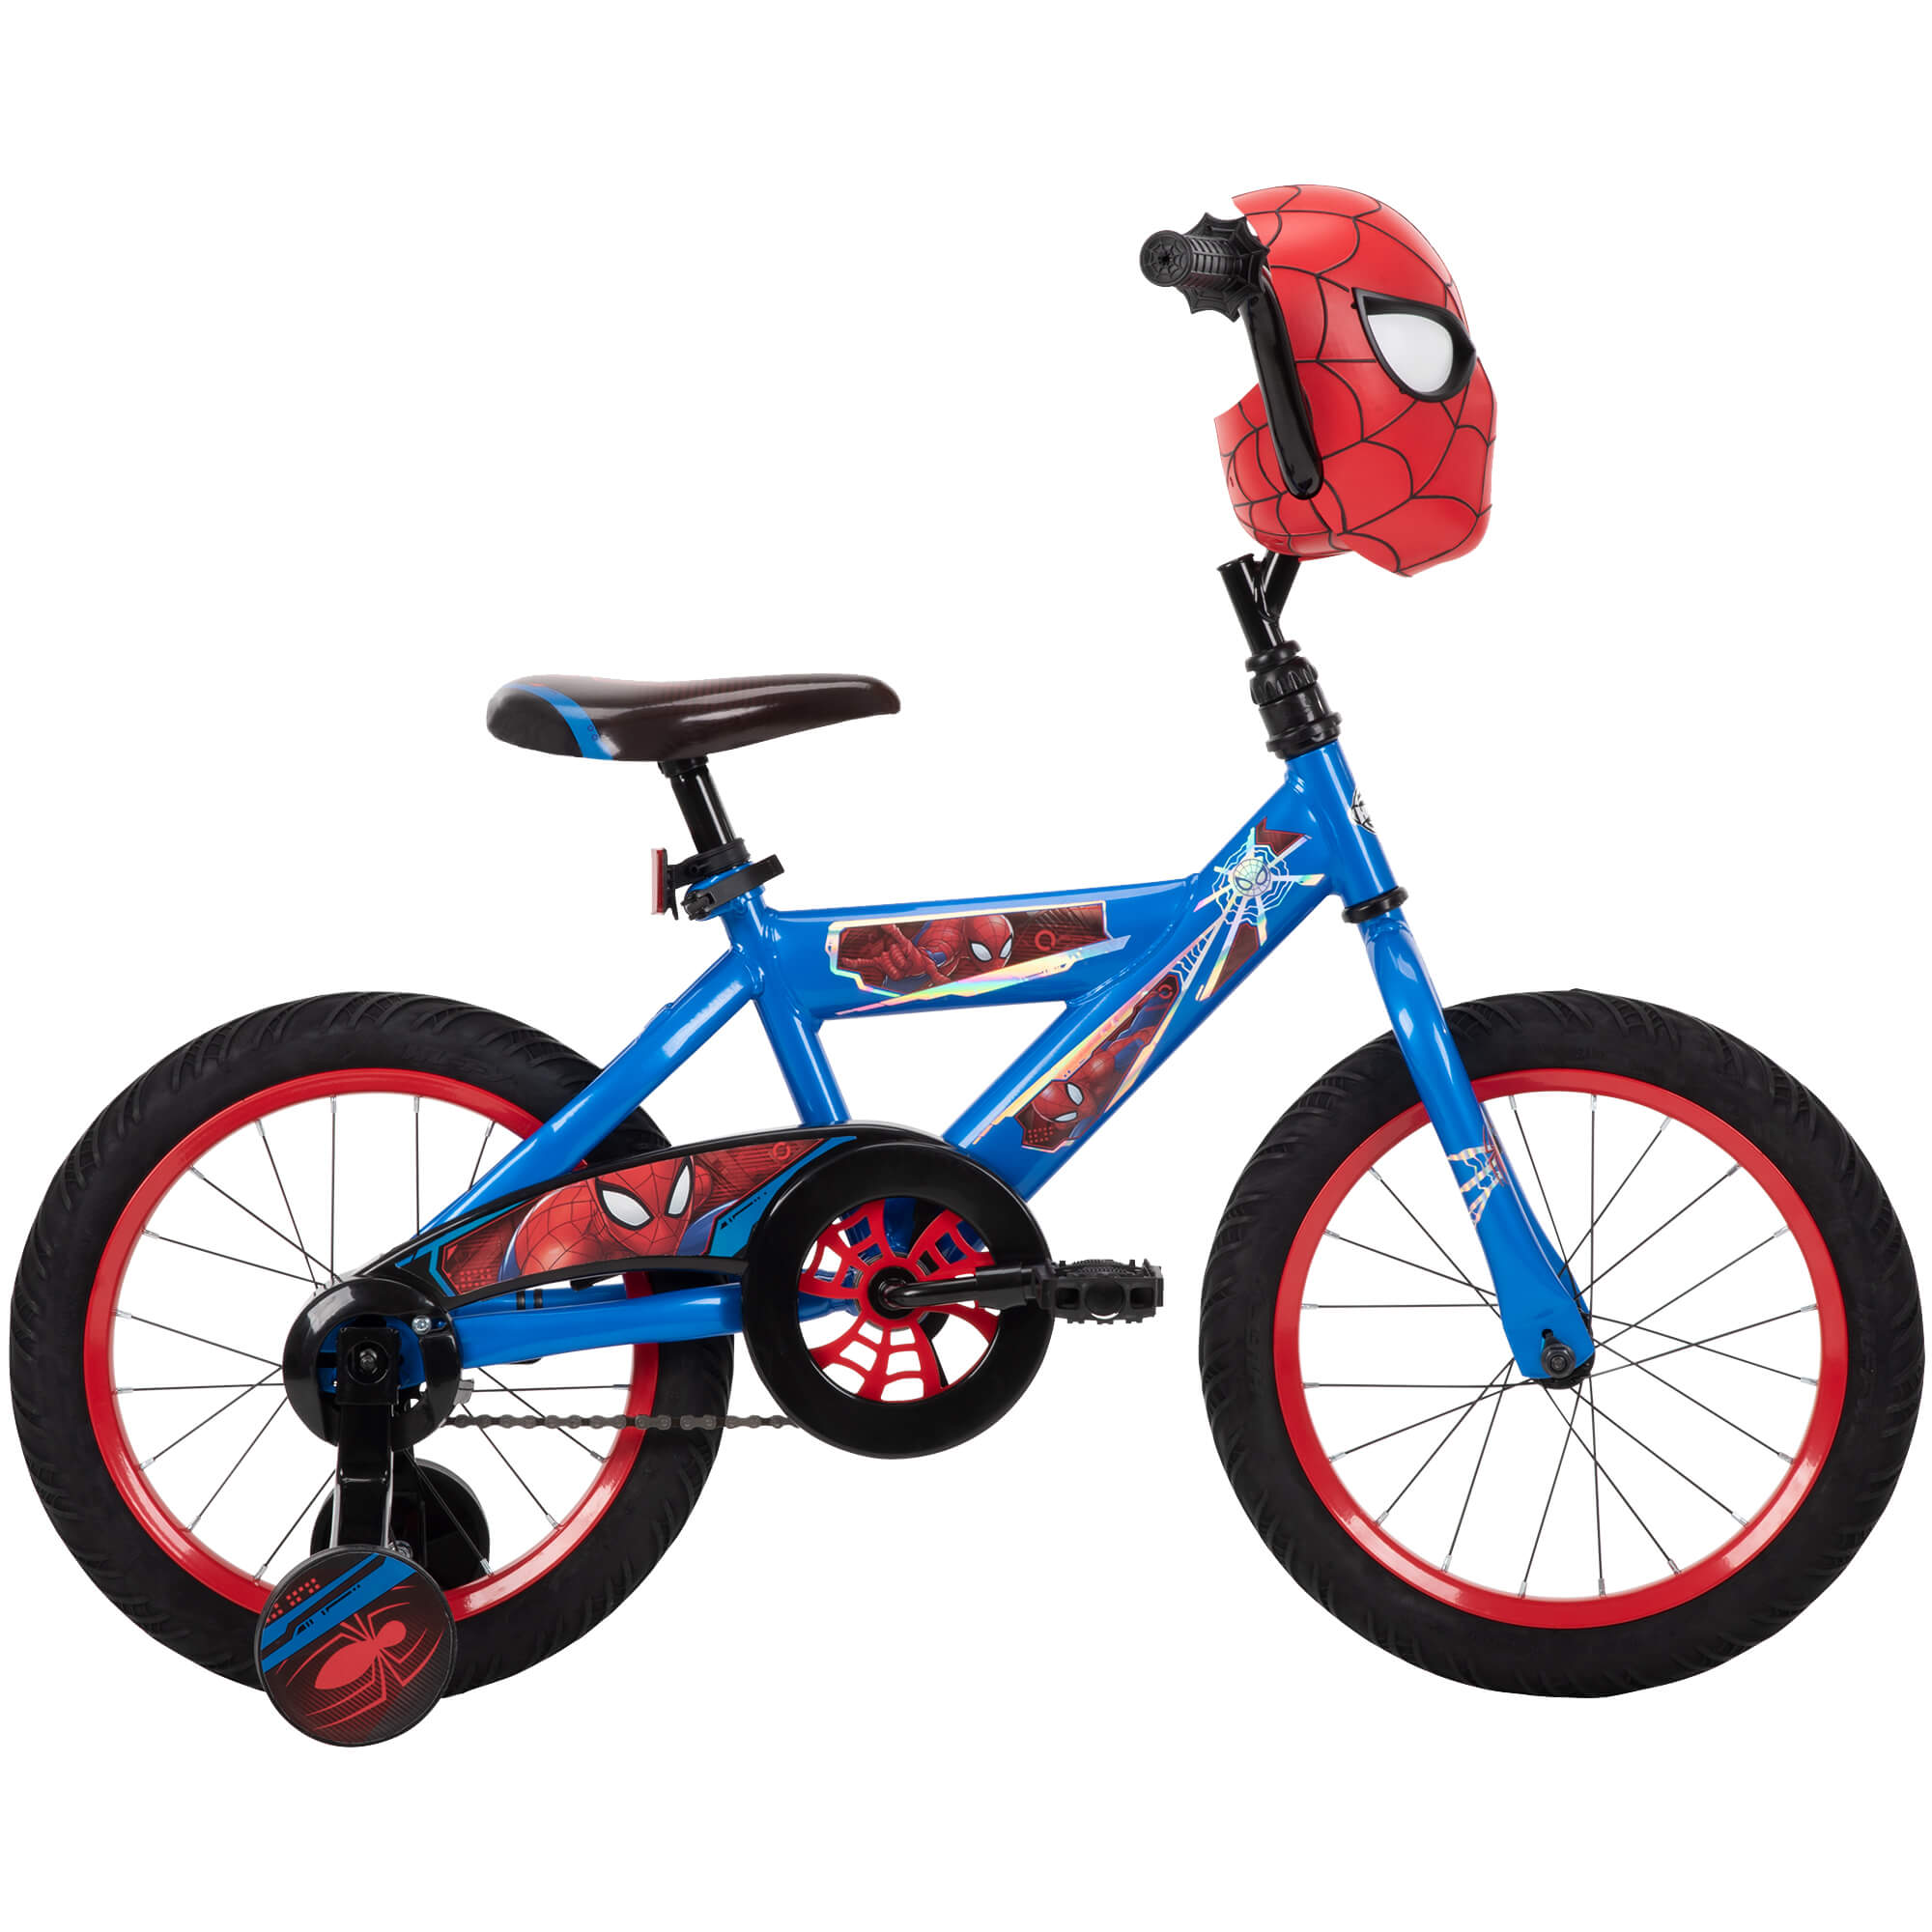 16" Marvel Spider-Man Bike for Boys' by Huffy - image 1 of 11